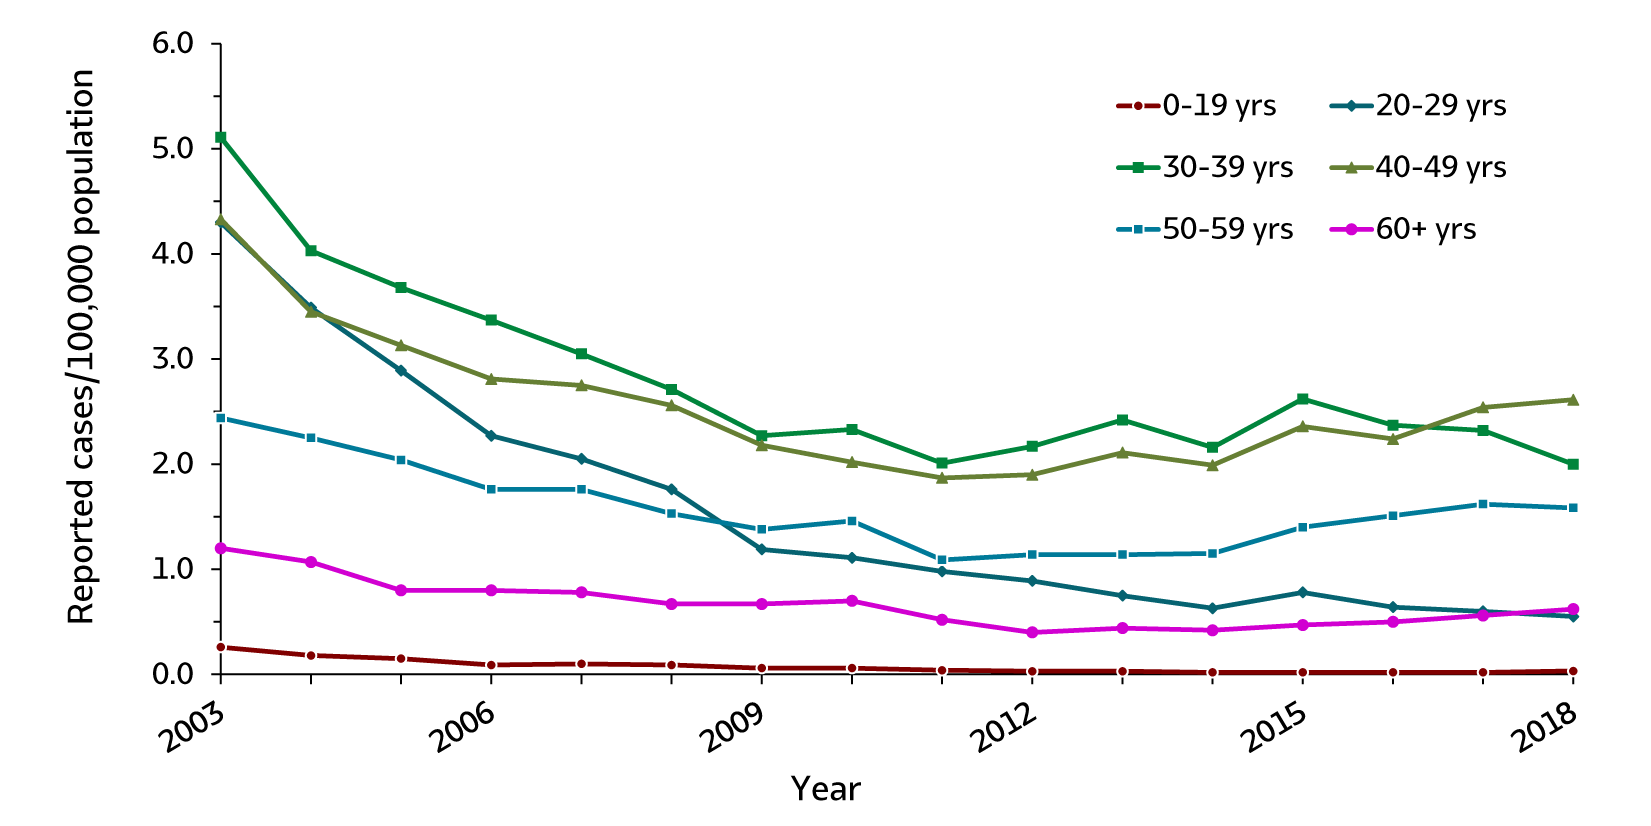 Figure 2.4. This line graph shows rates of acute hepatitis B by age groups (0 – 19 years, 20 – 29 years, 30 – 39 years, 40 – 49 years, 50 – 59 years, and 60 years and older) for 2003 through 2018. For all age groups the rates of acute hepatitis B generally declined from 2003 through 2009 and remained stable from 2009 through 2018.  Persons aged 30-40 years represented over half of the acute hepatitis B case reports submitted to CDC in 2018.